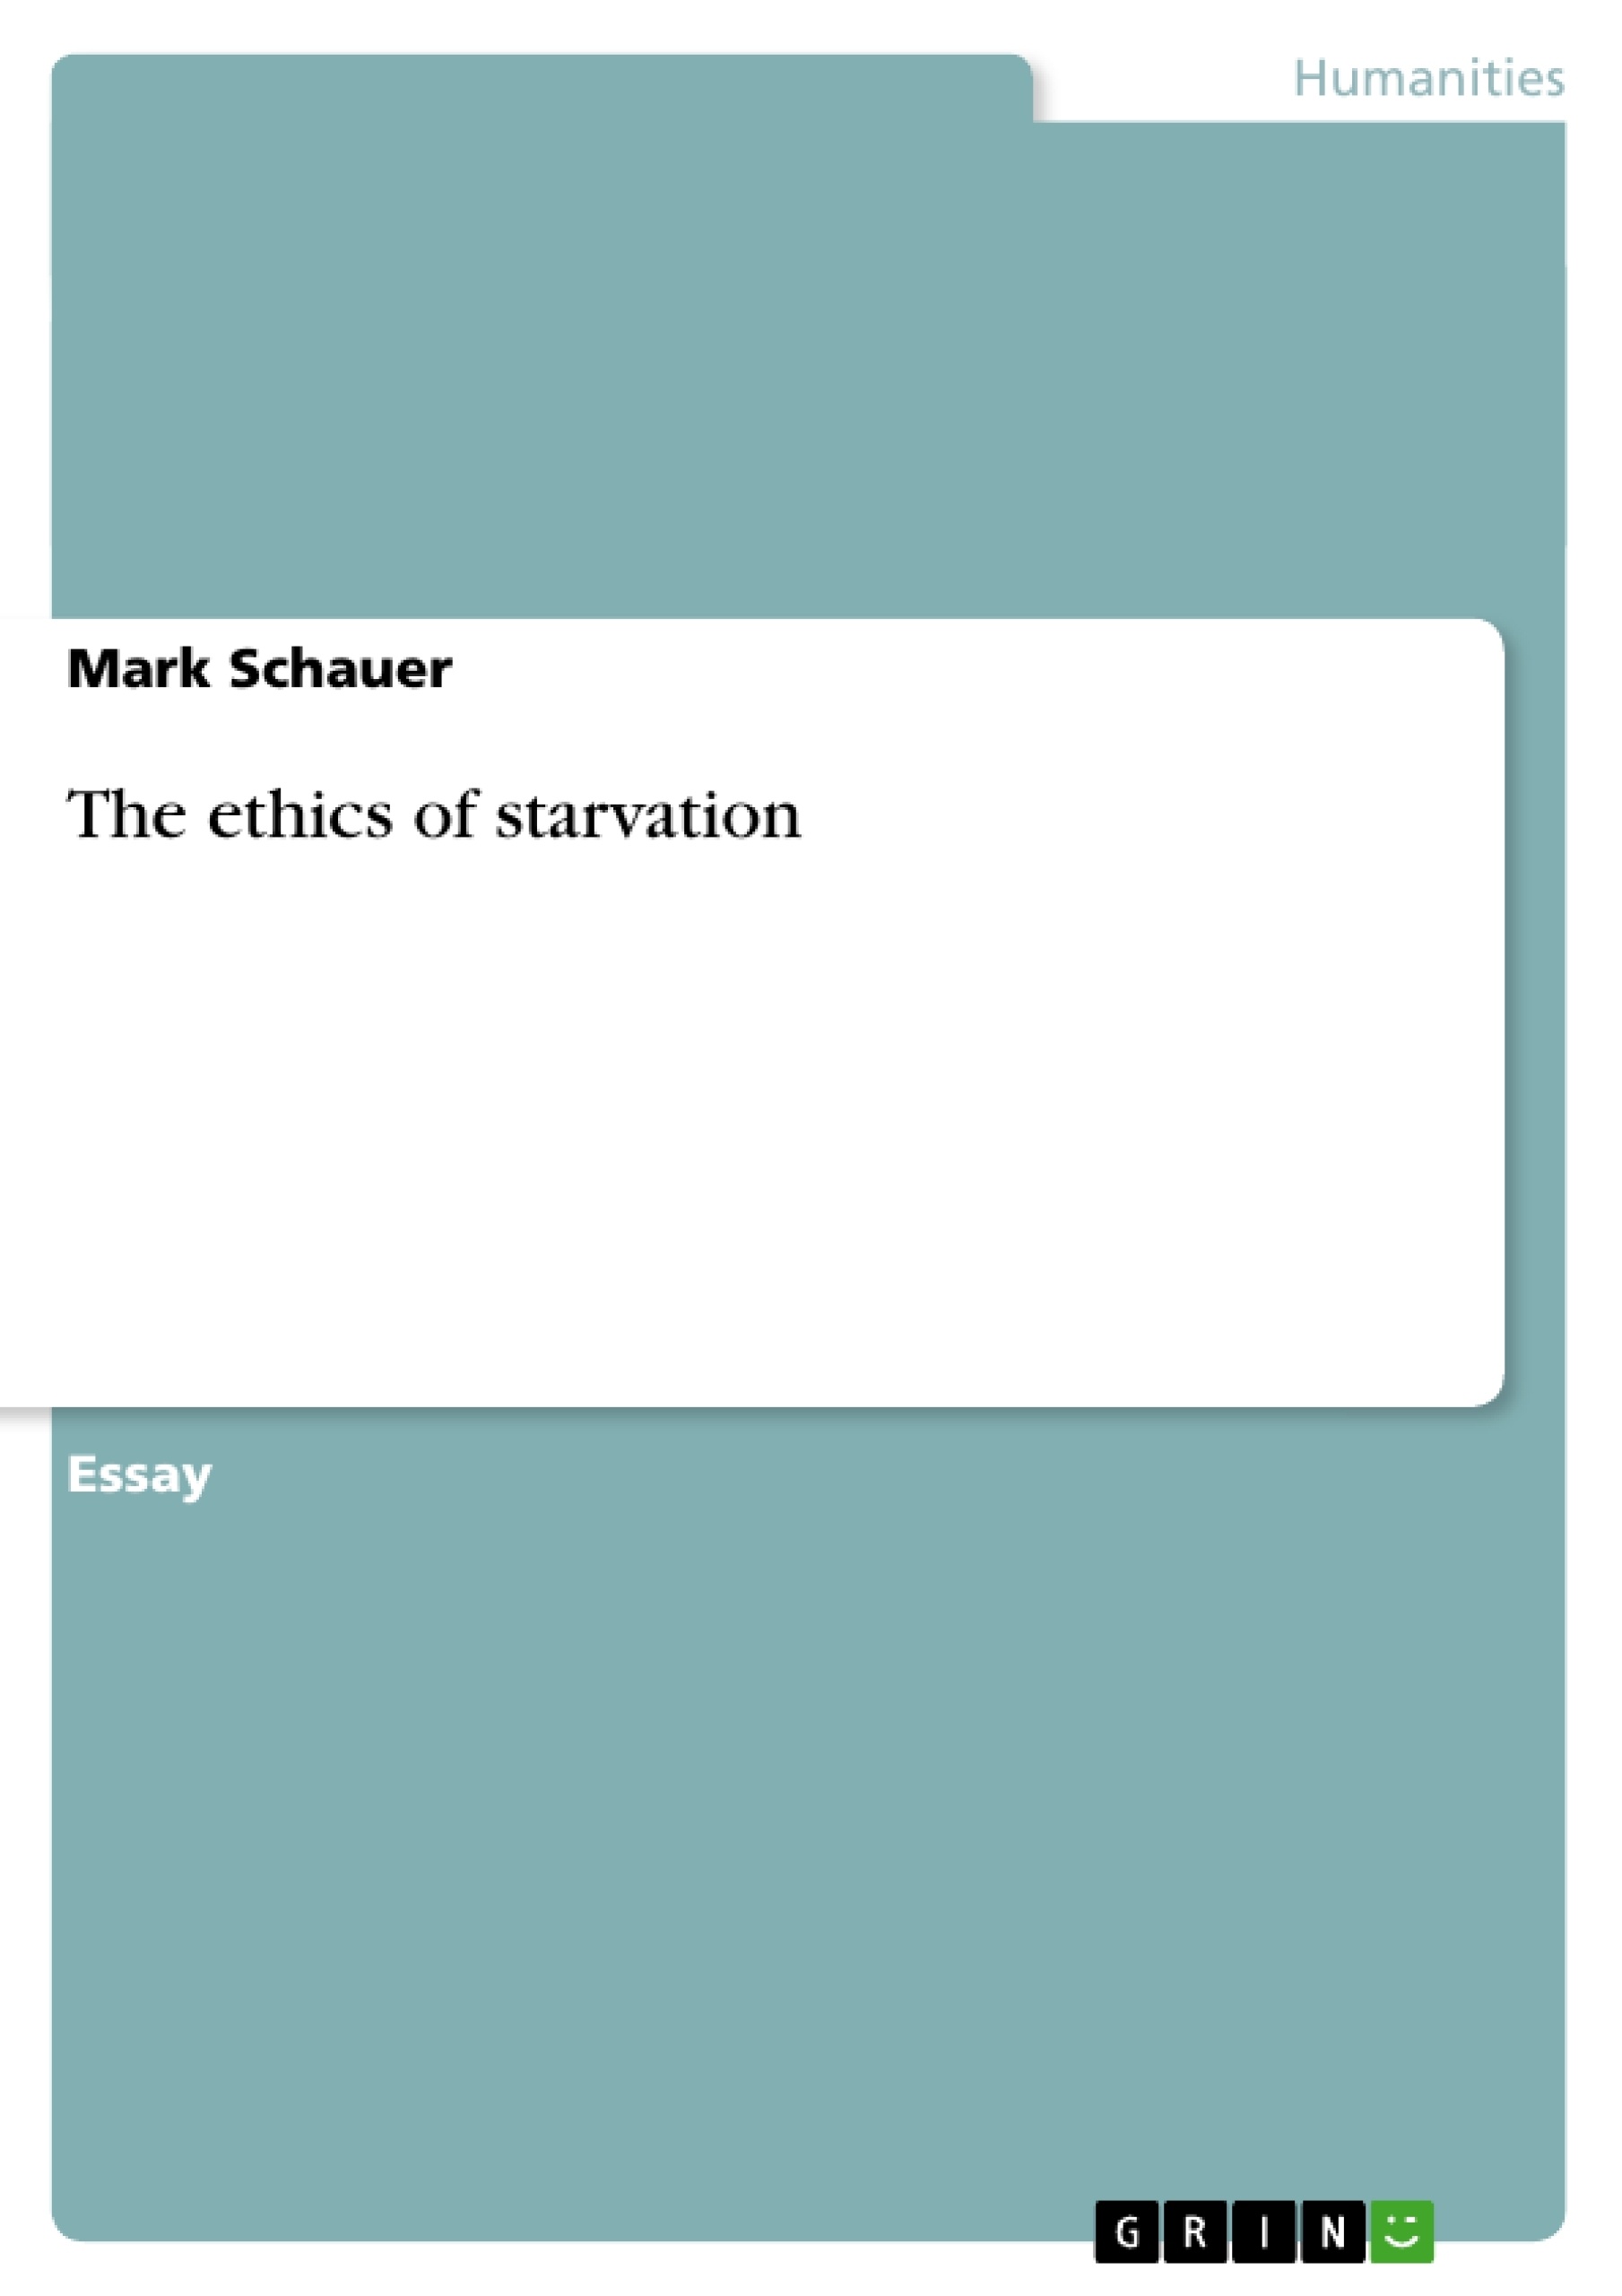 Title: The ethics of starvation